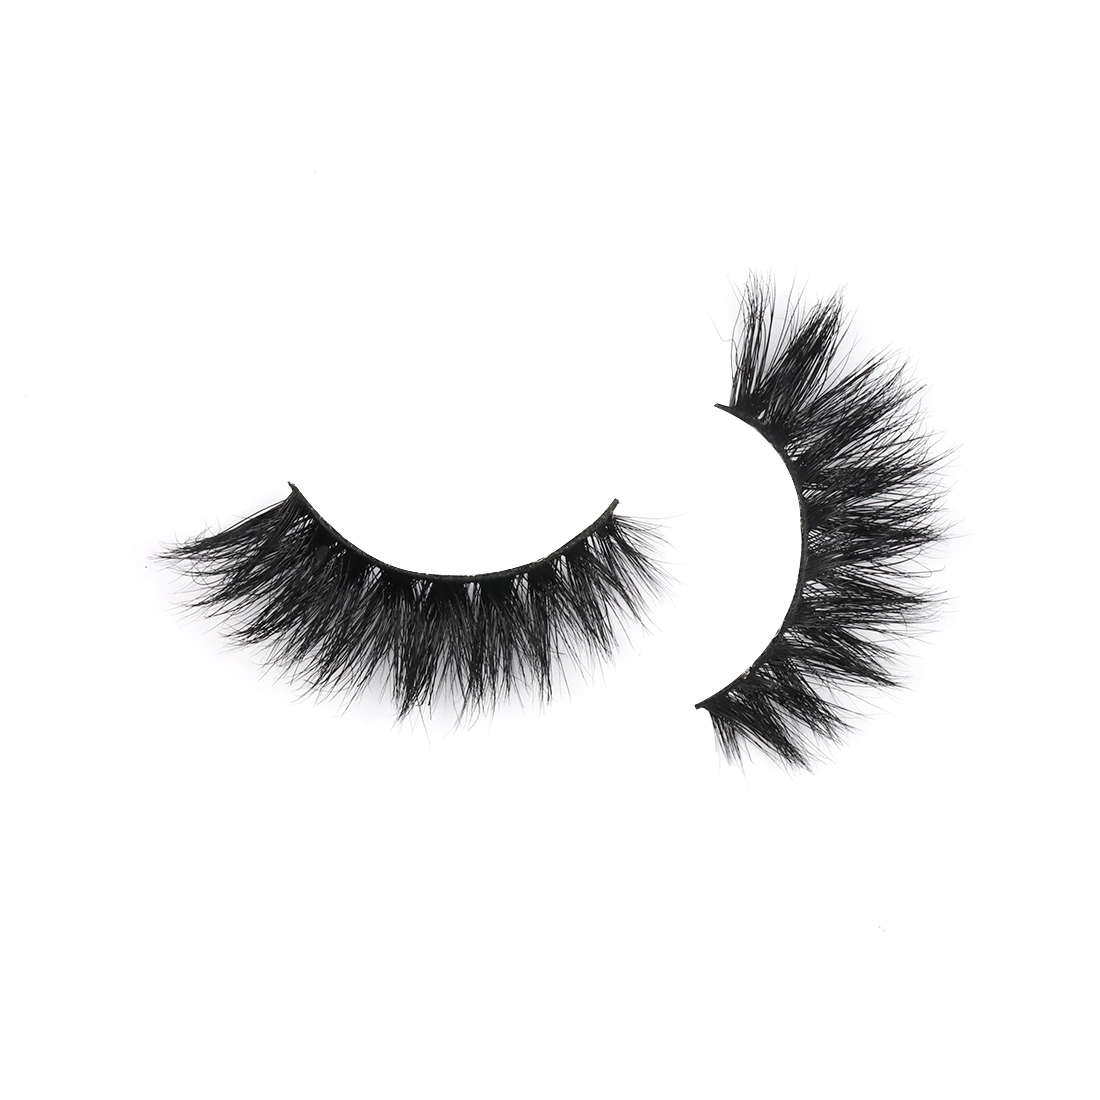 High-Quality Individual Real Mink Lashes 3d Wholesale-YZZ